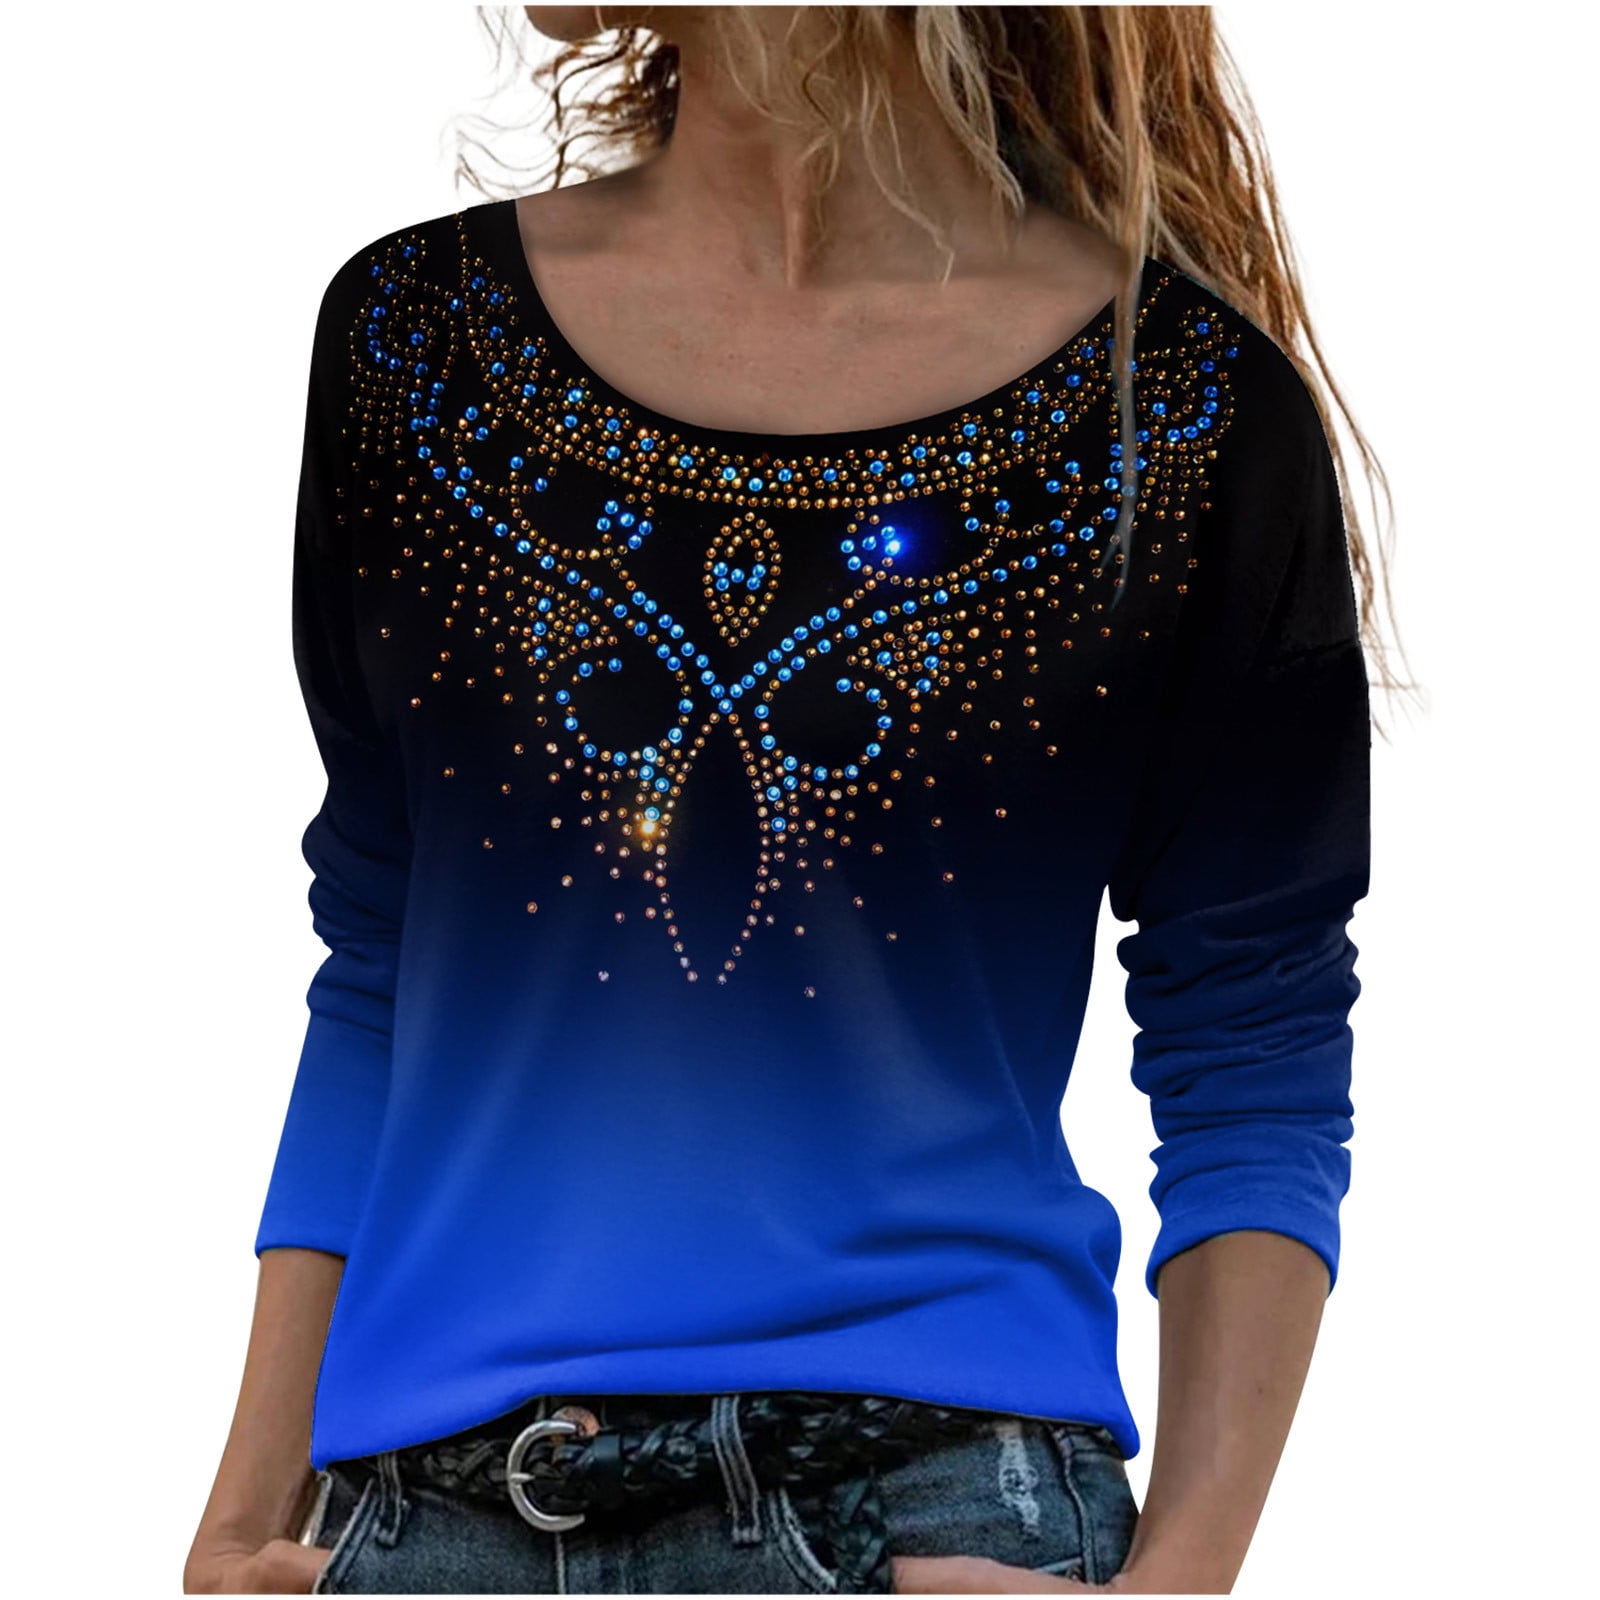 Western Tops for Ladies Plus Size Tops Womens Fall Fashion Long